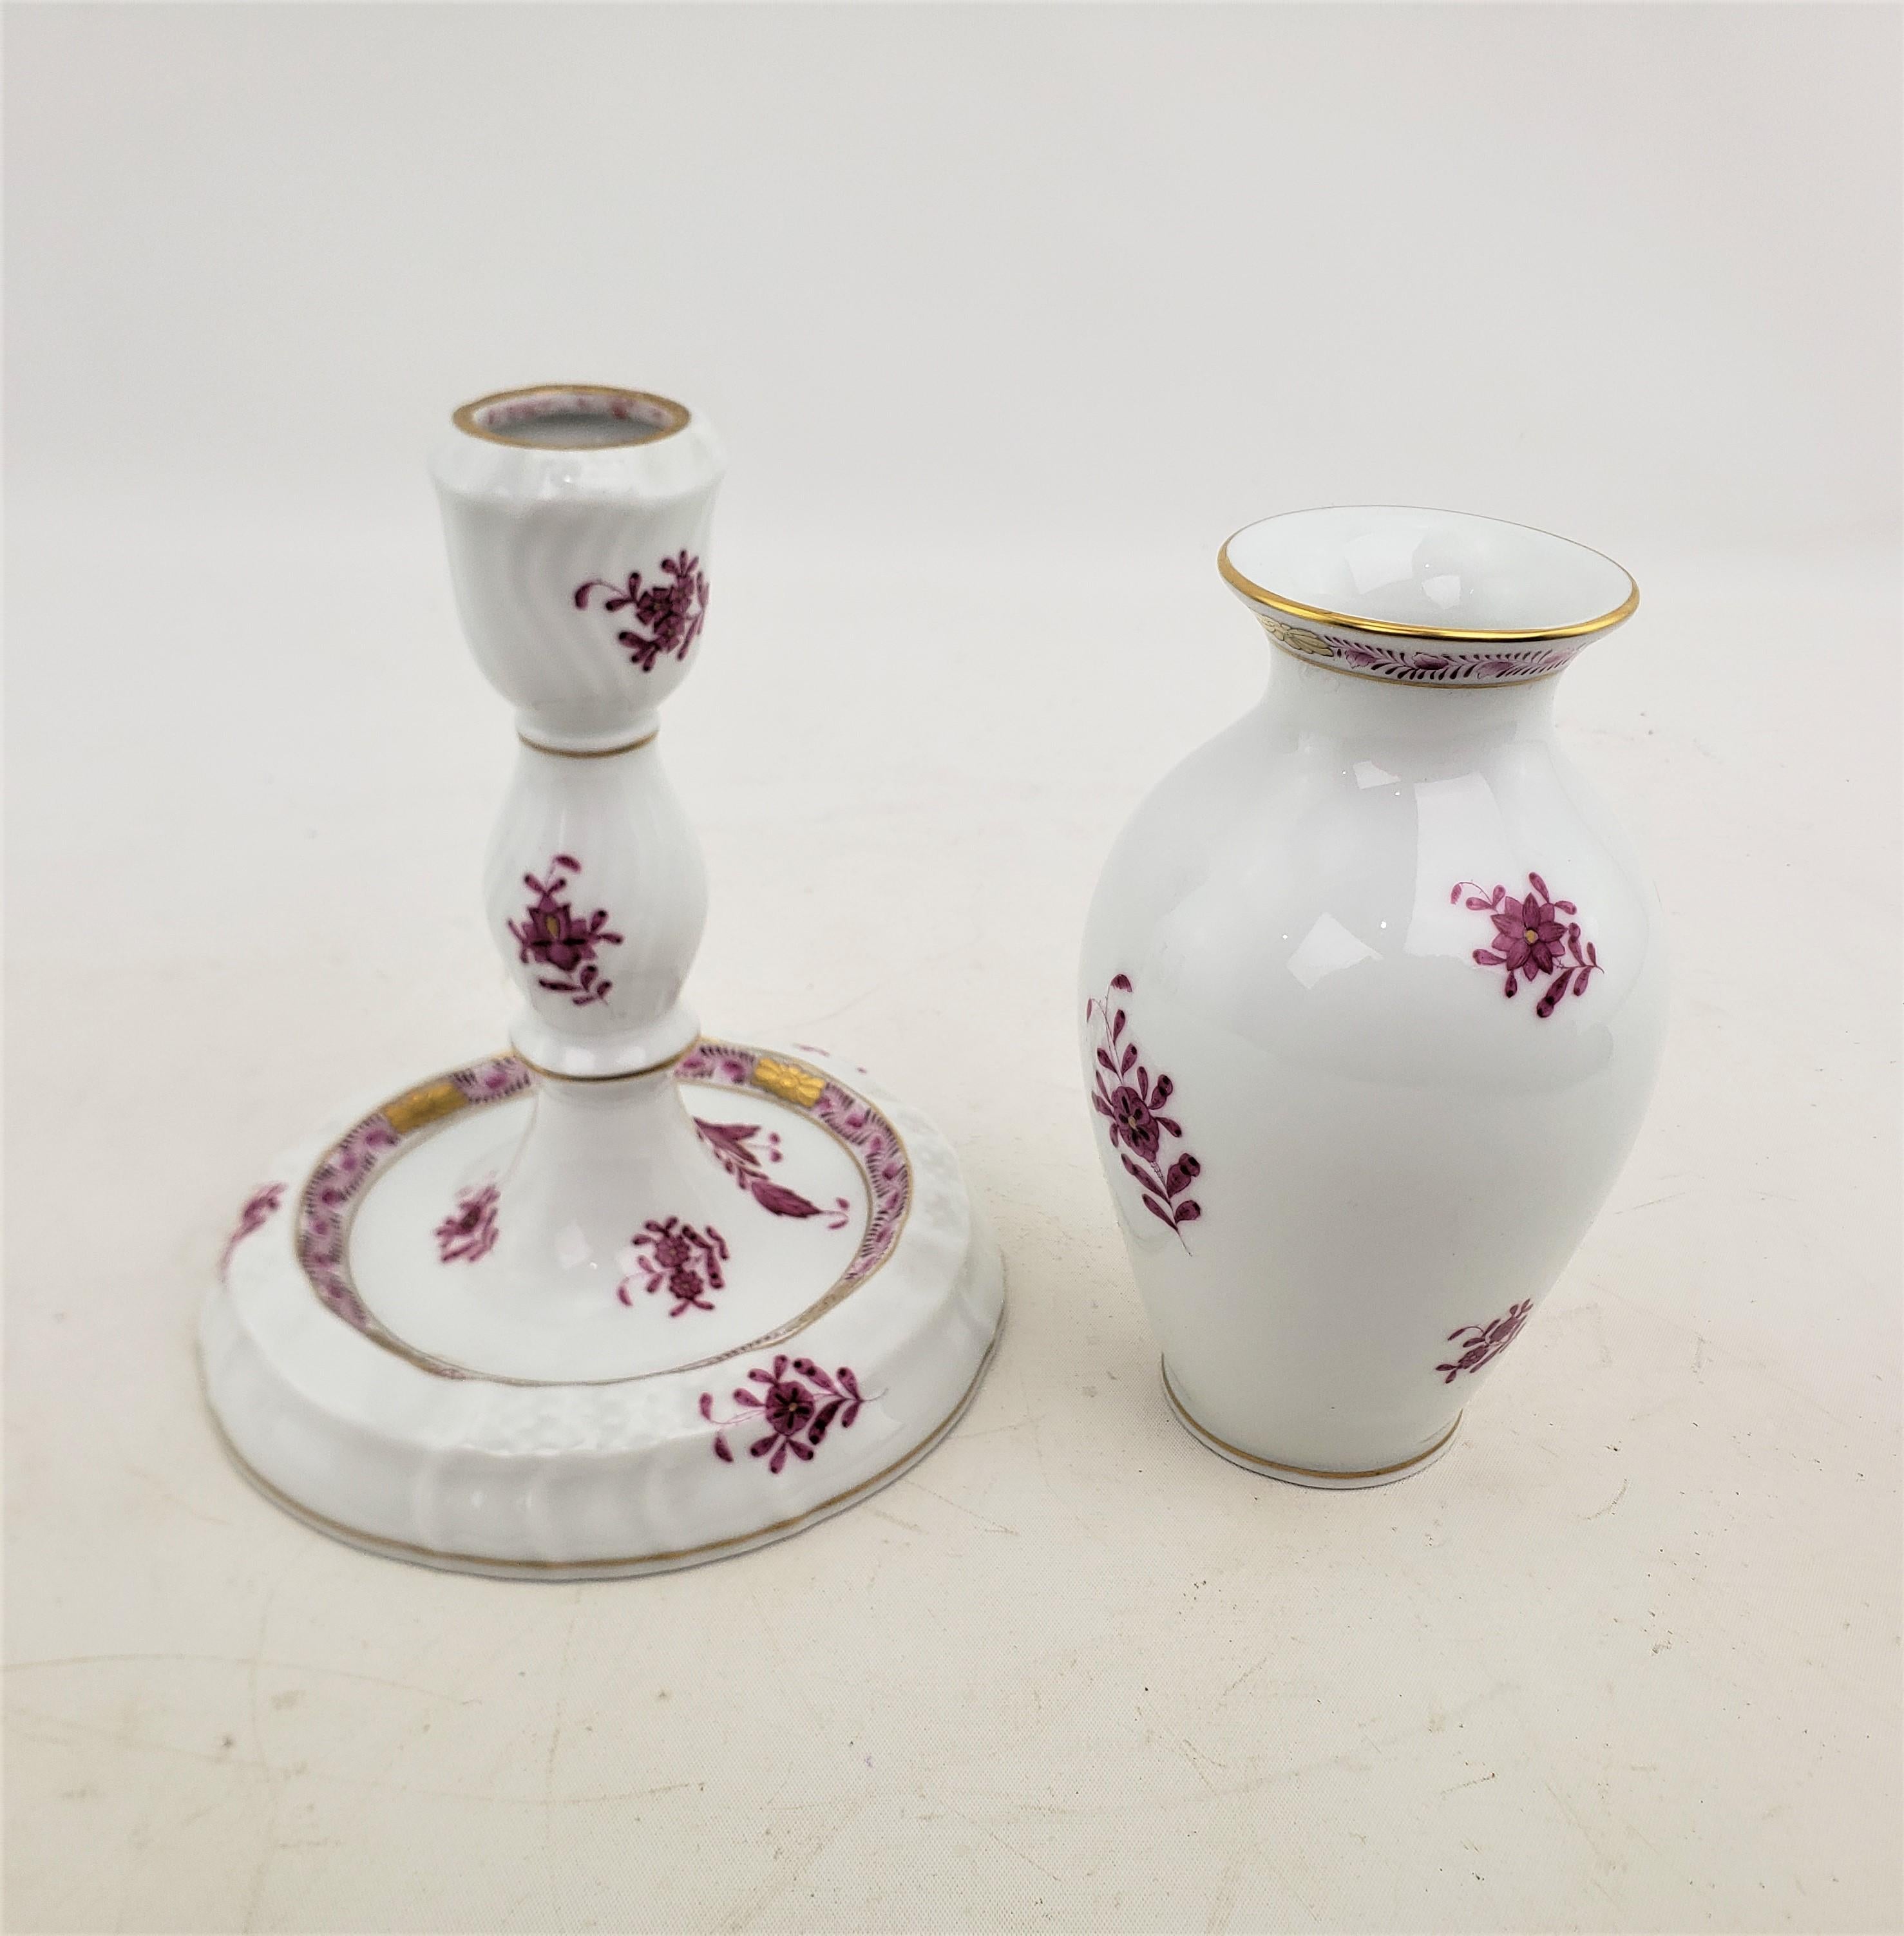 Herend Porcelain Raspberry Chinese Bouquet Candlestick & Vase Pairing In Good Condition For Sale In Hamilton, Ontario